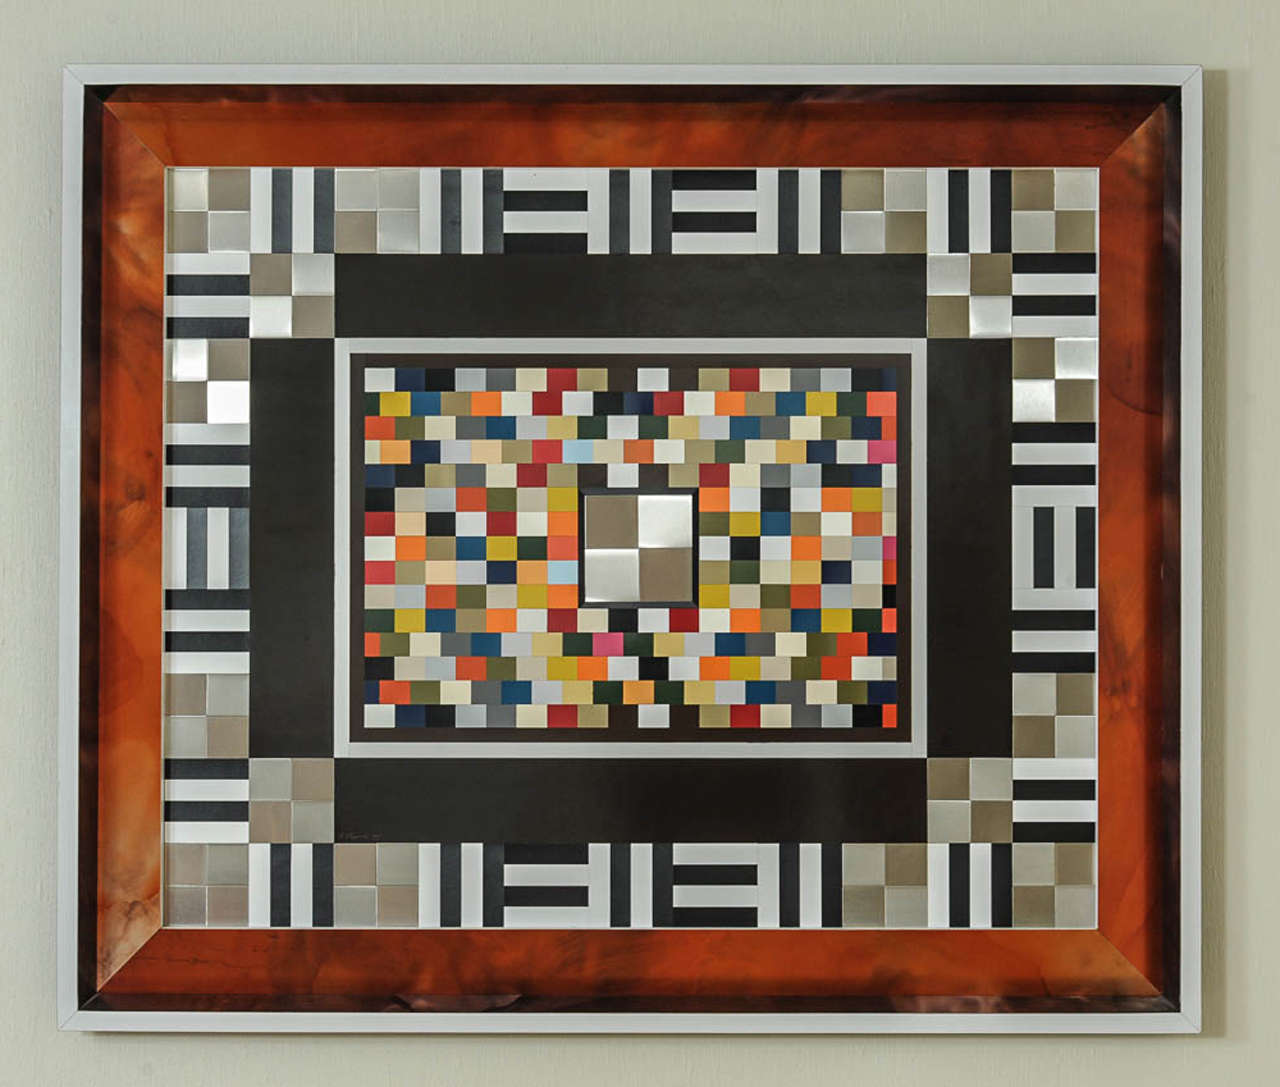 Stunning piece of art from the 1970s.
It is made out of tiny blocks of aluminium and formica, in a frame providing for depth.
Measures: 91 x 107cm
Signed E. Segura, 1975.